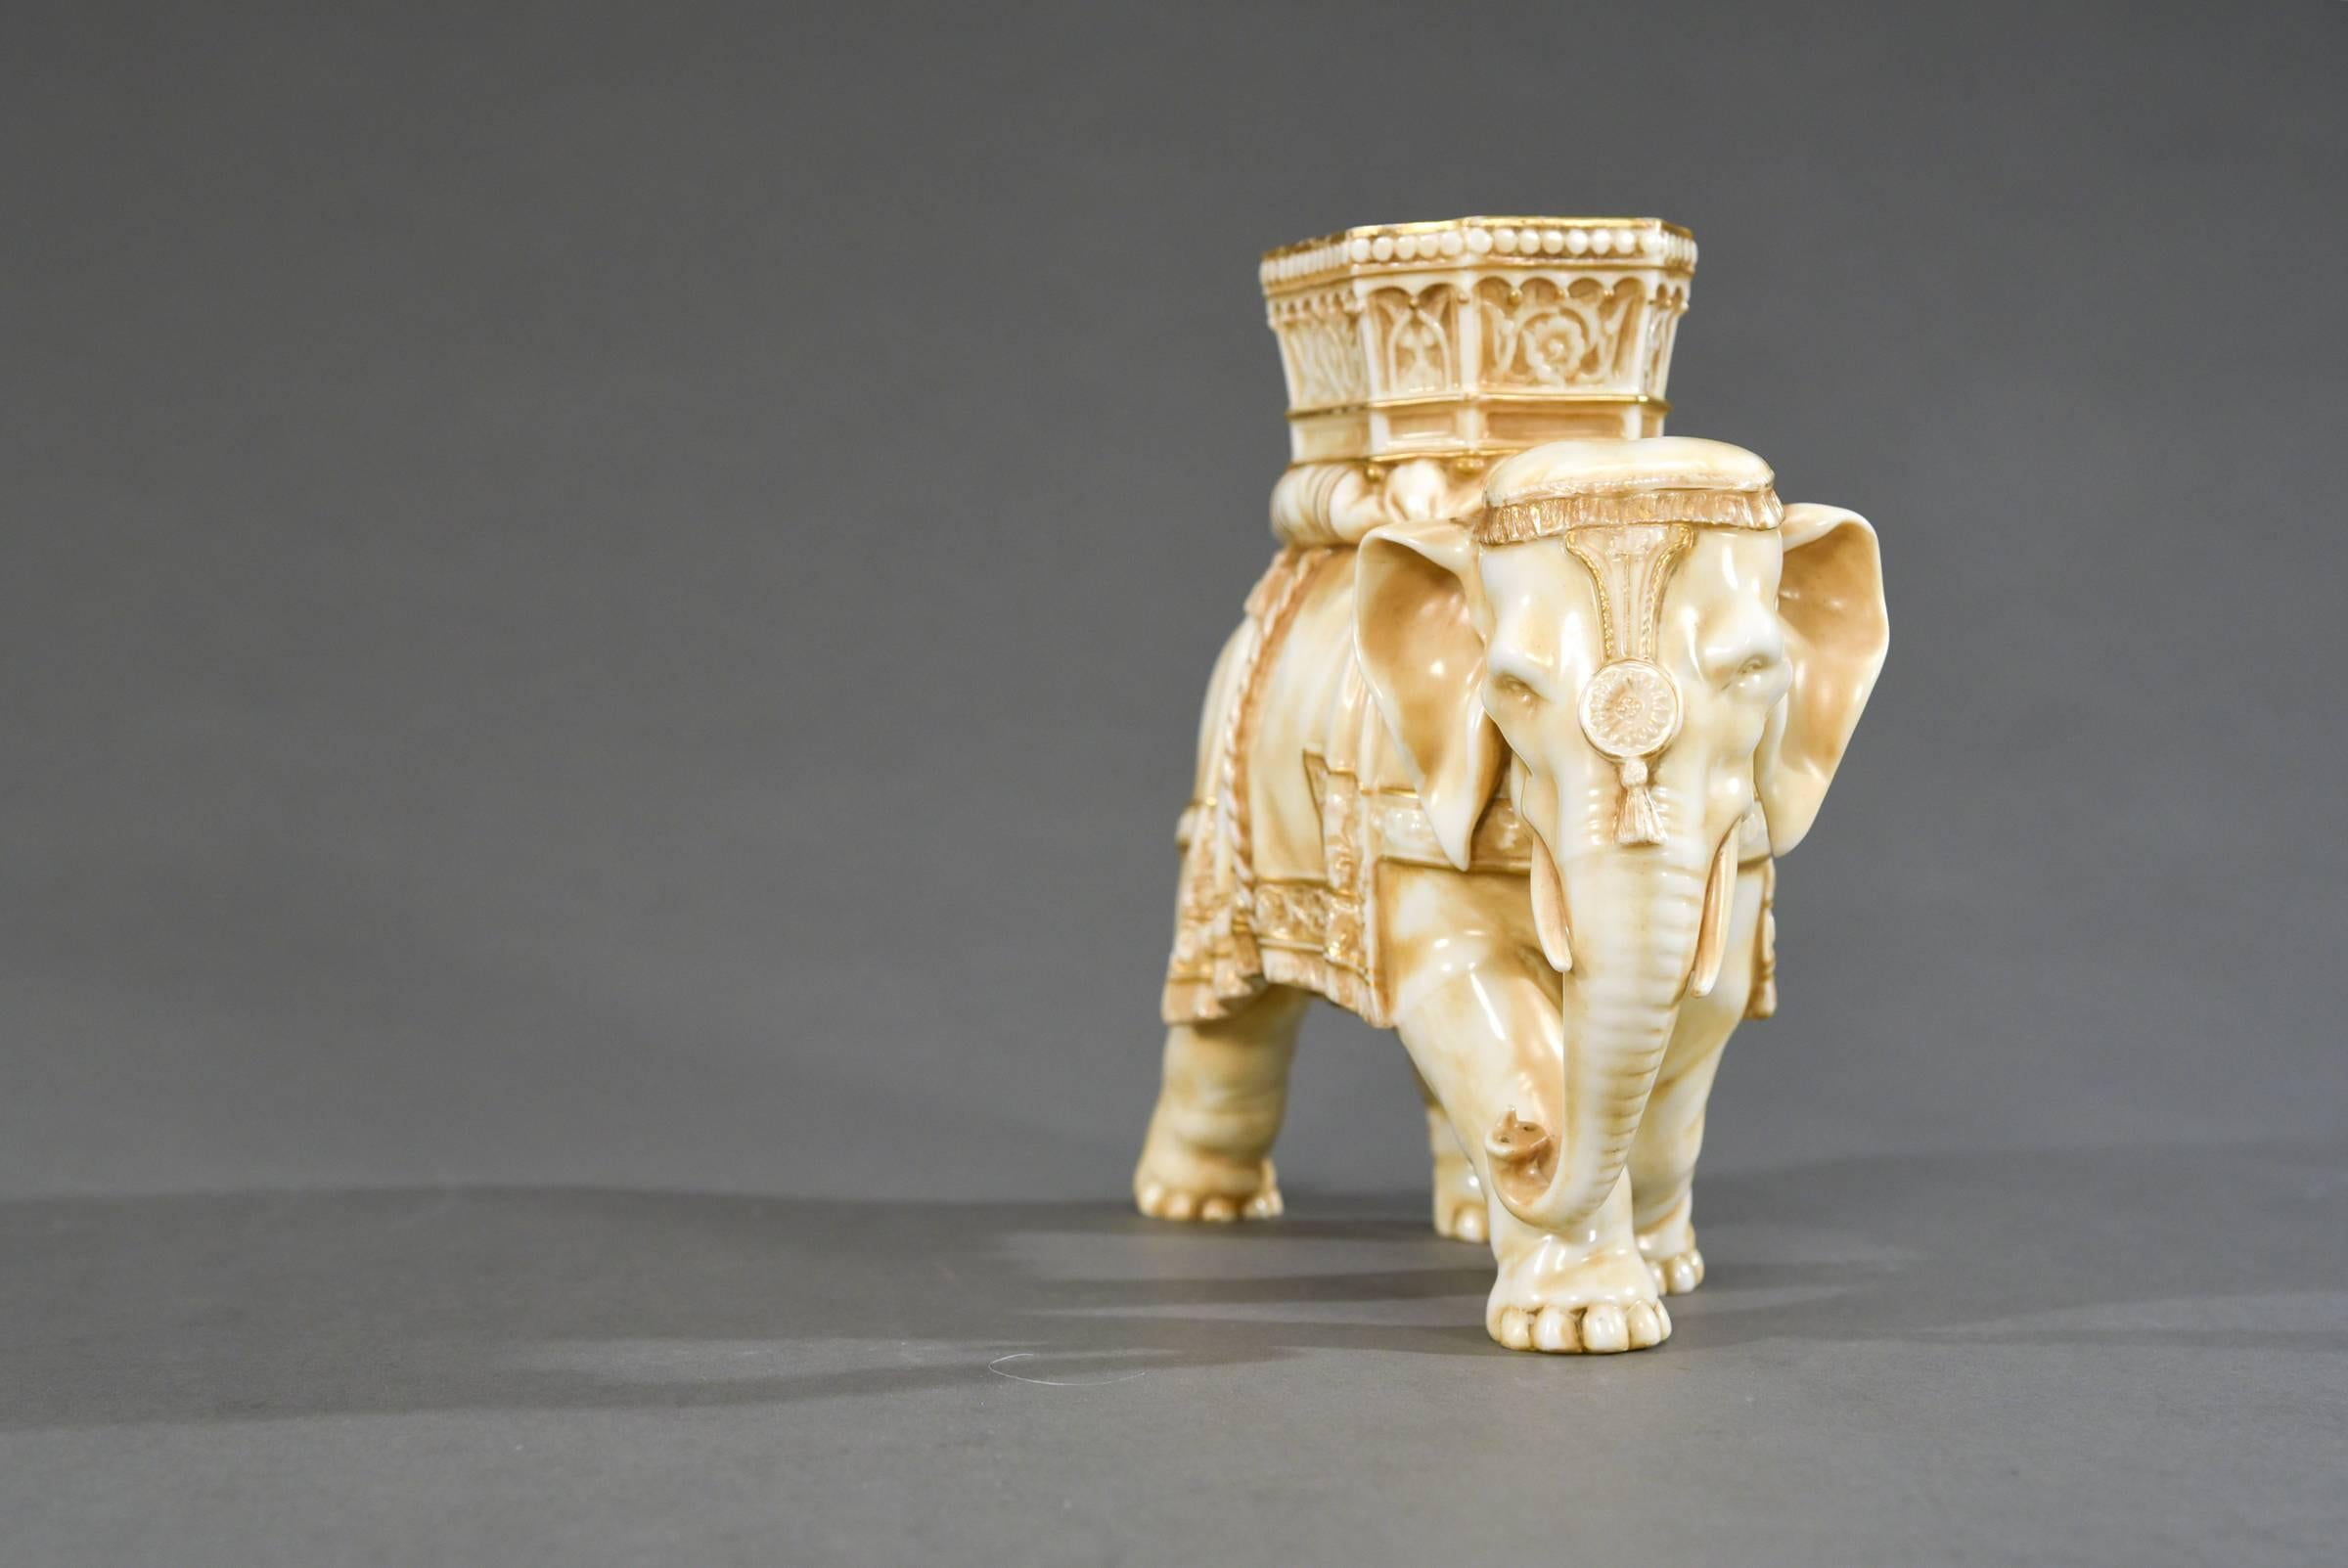 This is a charming 19th century English figural vase of an Indian elephant wearing a ceremonial howdah and head dress. Modelled by Royal Worcester's chief modeller, James Hadley, it is hand-painted in ivory and highlighted in gold. Marked with the